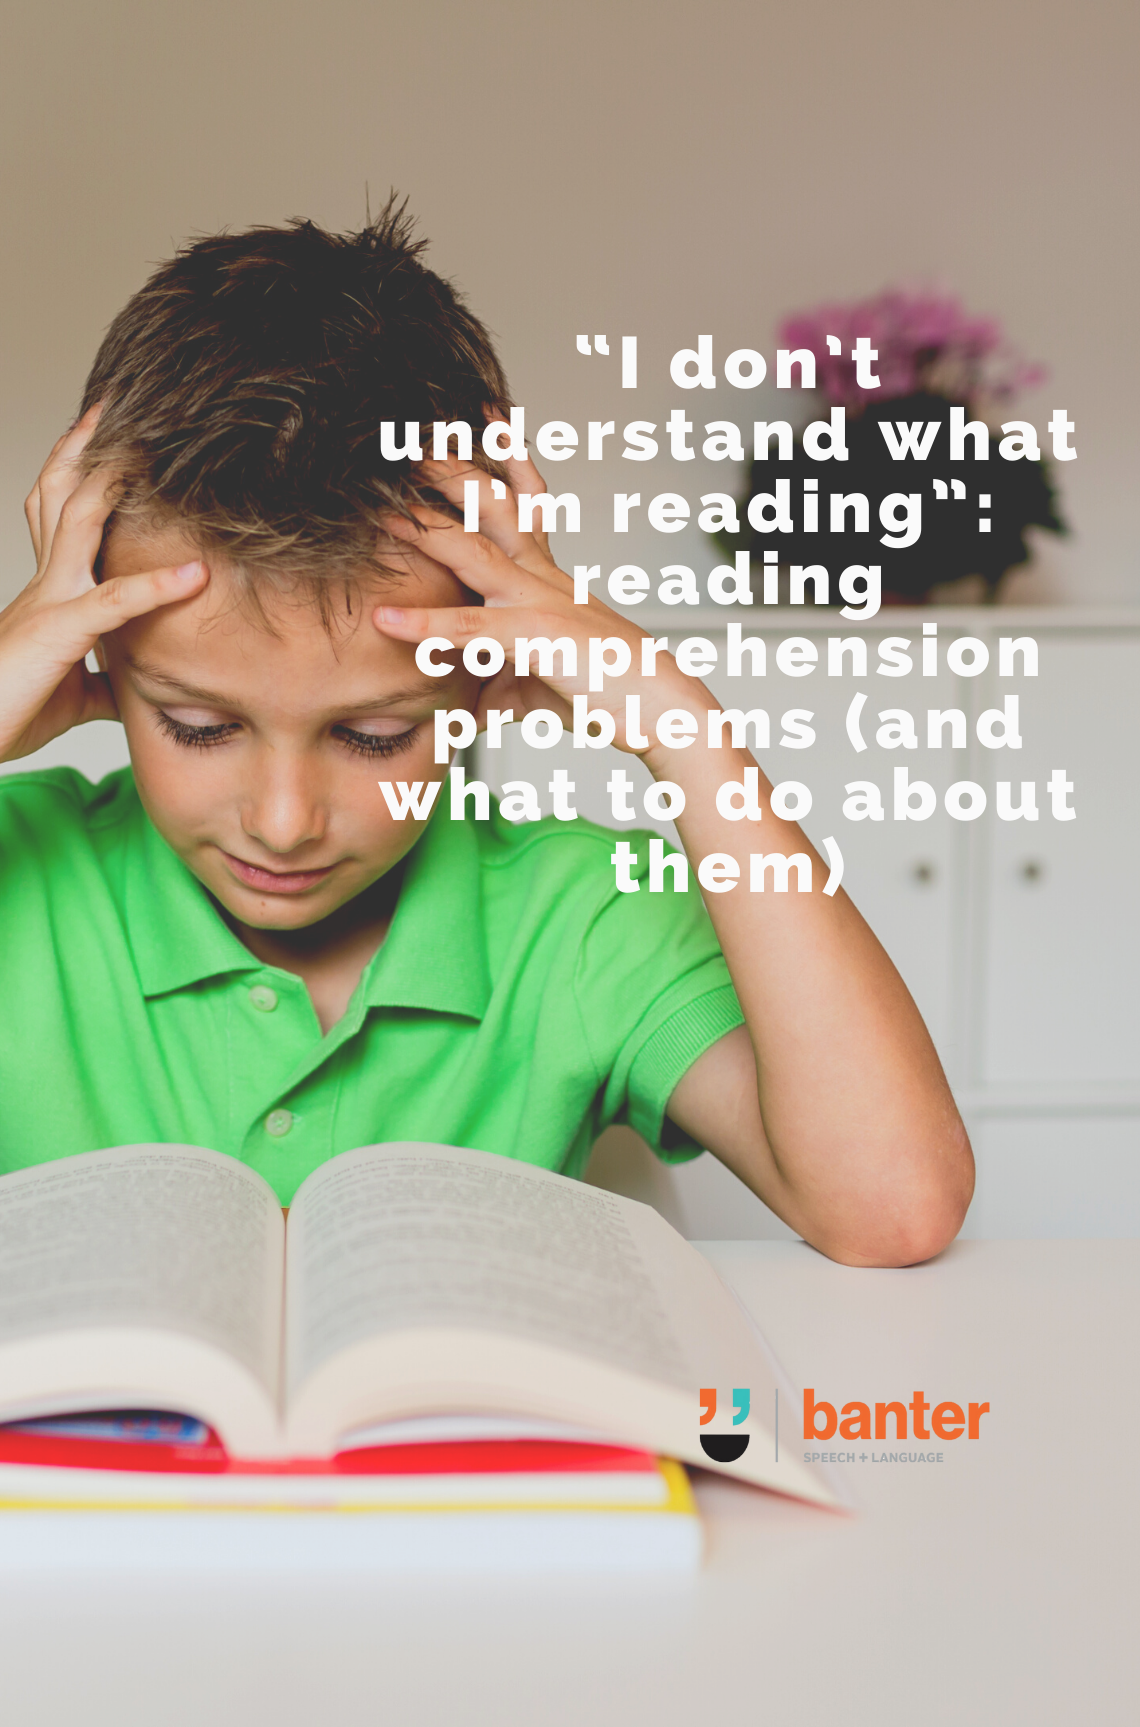 “I don’t understand what I’m reading” – reading comprehension problems (and what to do about them)